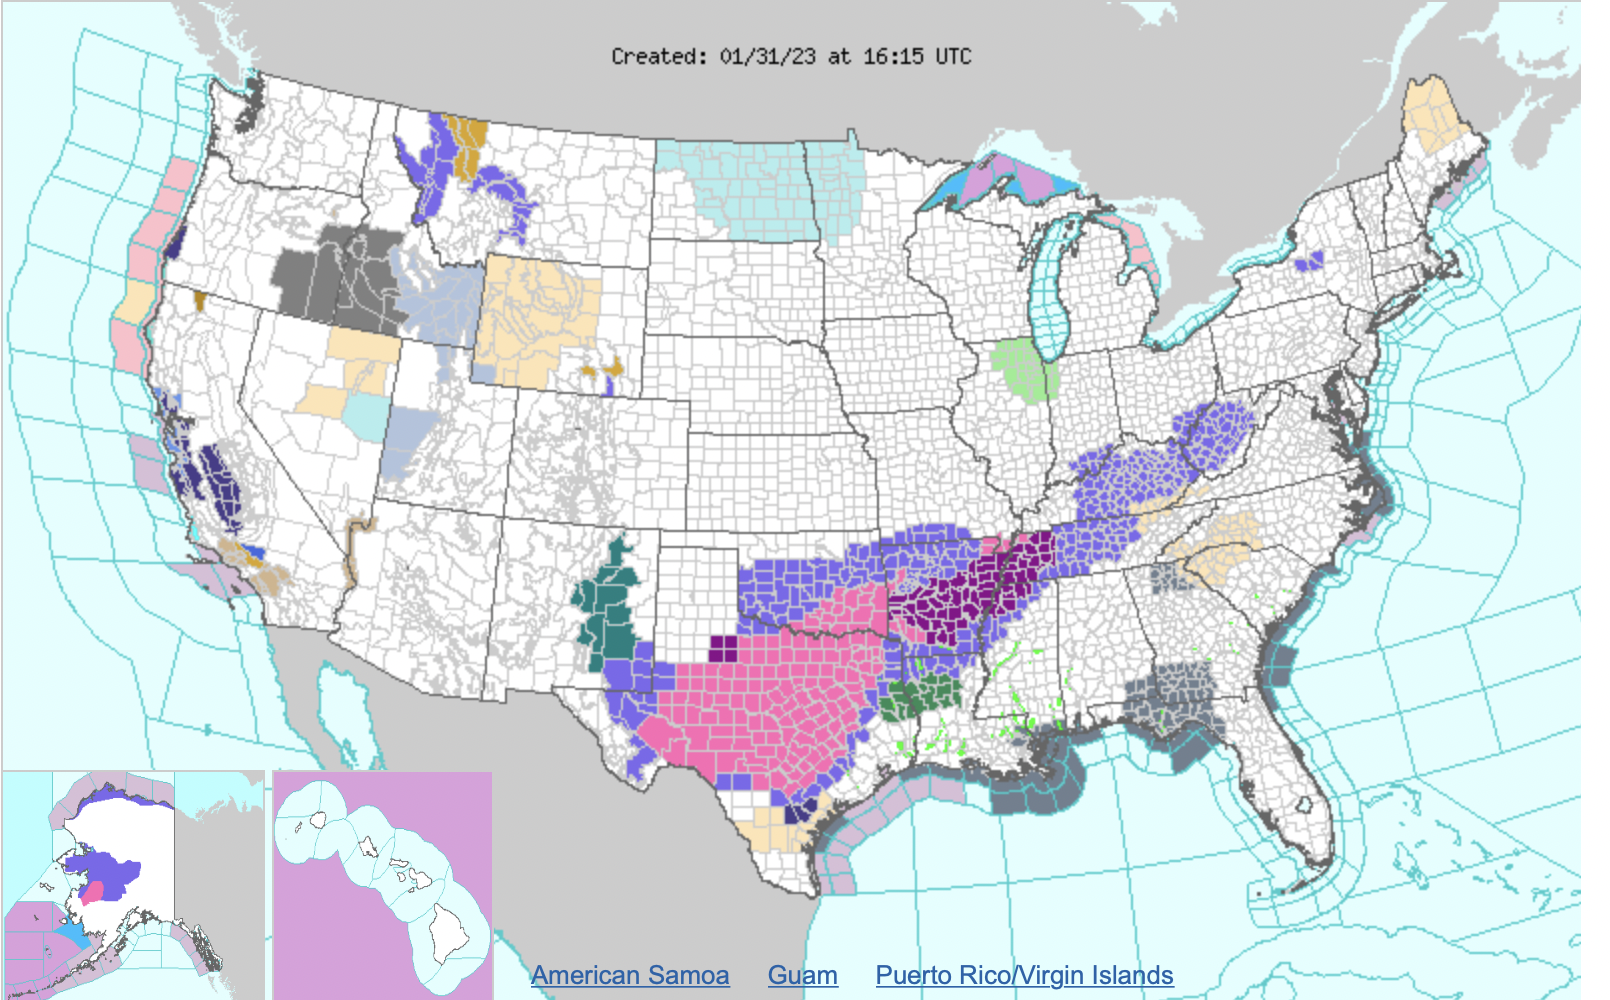 Dangerous ice storm for Portions of the US South – Over 1,000 Airline Cancelations